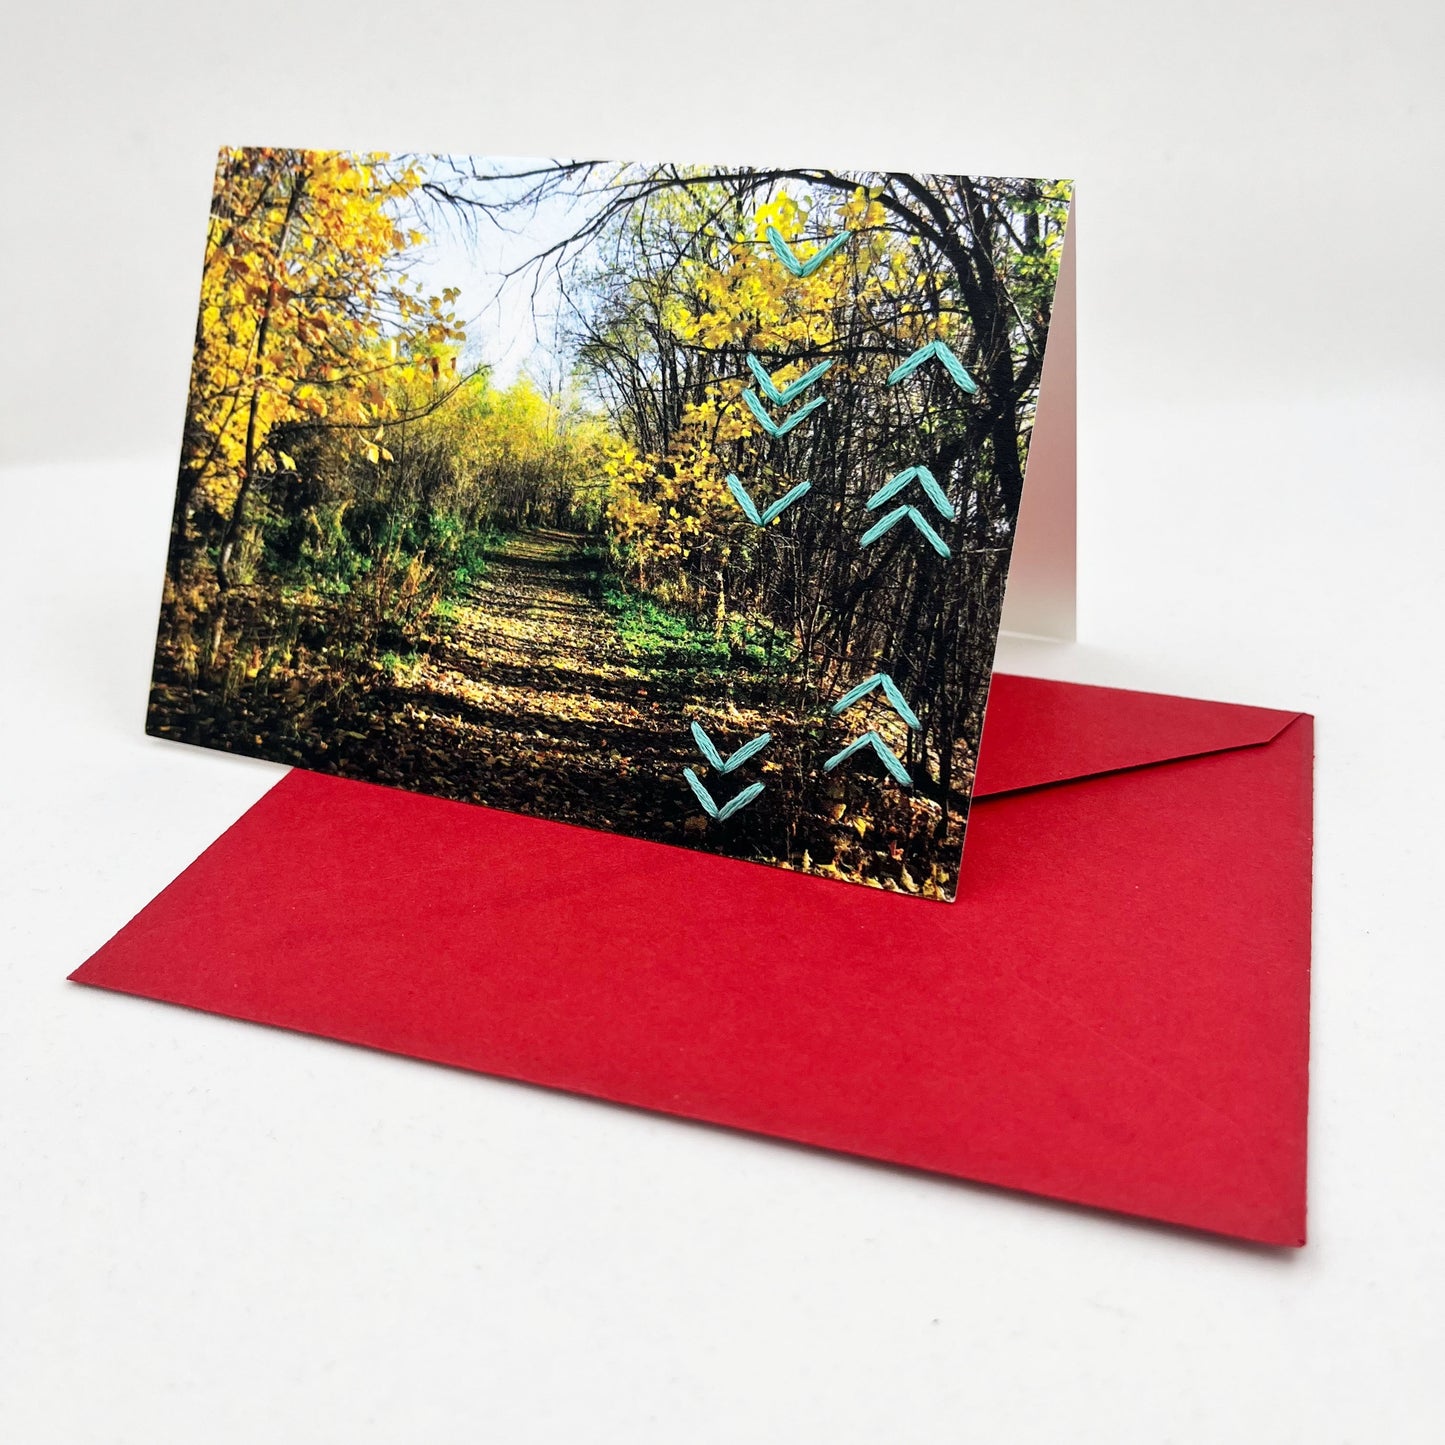 Greeting card standing upright on an envelope. Photo of a path through the woods in fall. Rows of aqua chevron stitches along right side card